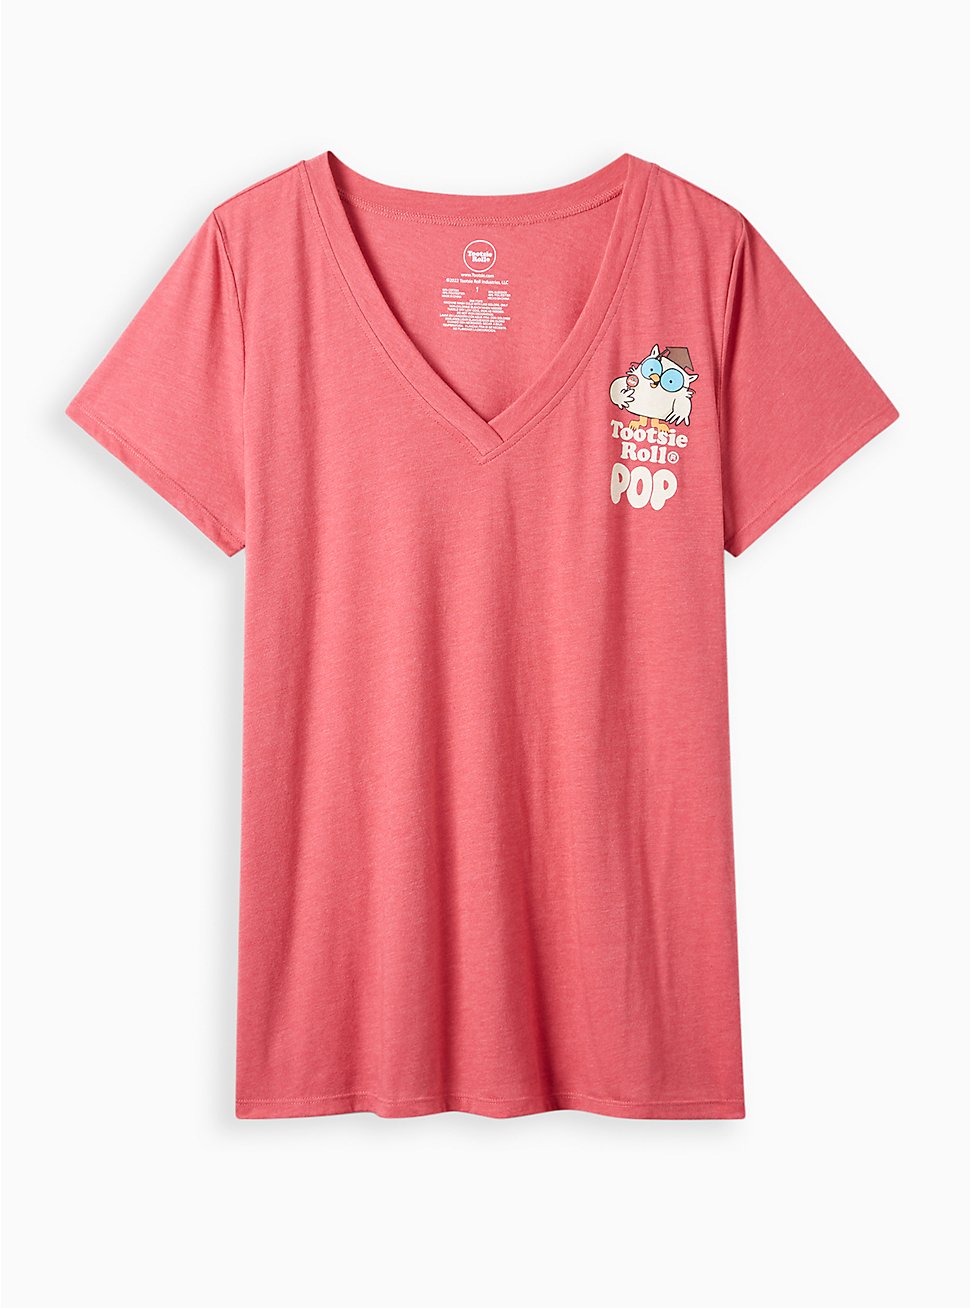 Plus Size Classic Fit V-Neck Ringer Tee - Cotton Red Tootsie Pop, JESTER RED, hi-res